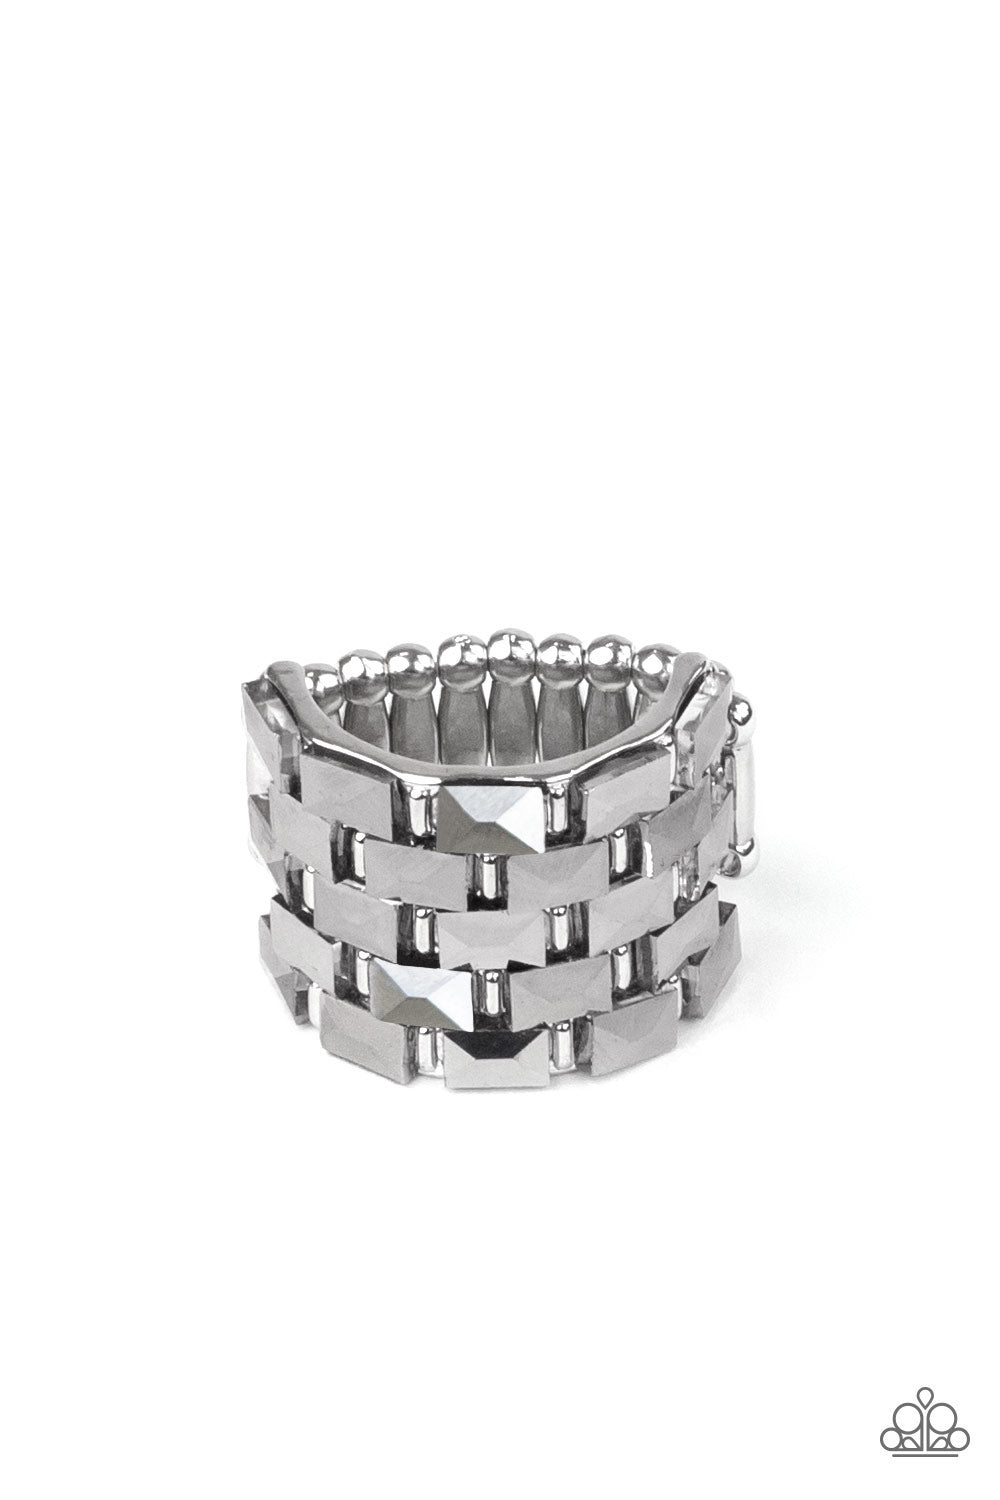 checkered-couture-silver-p4st-svxx-006xx